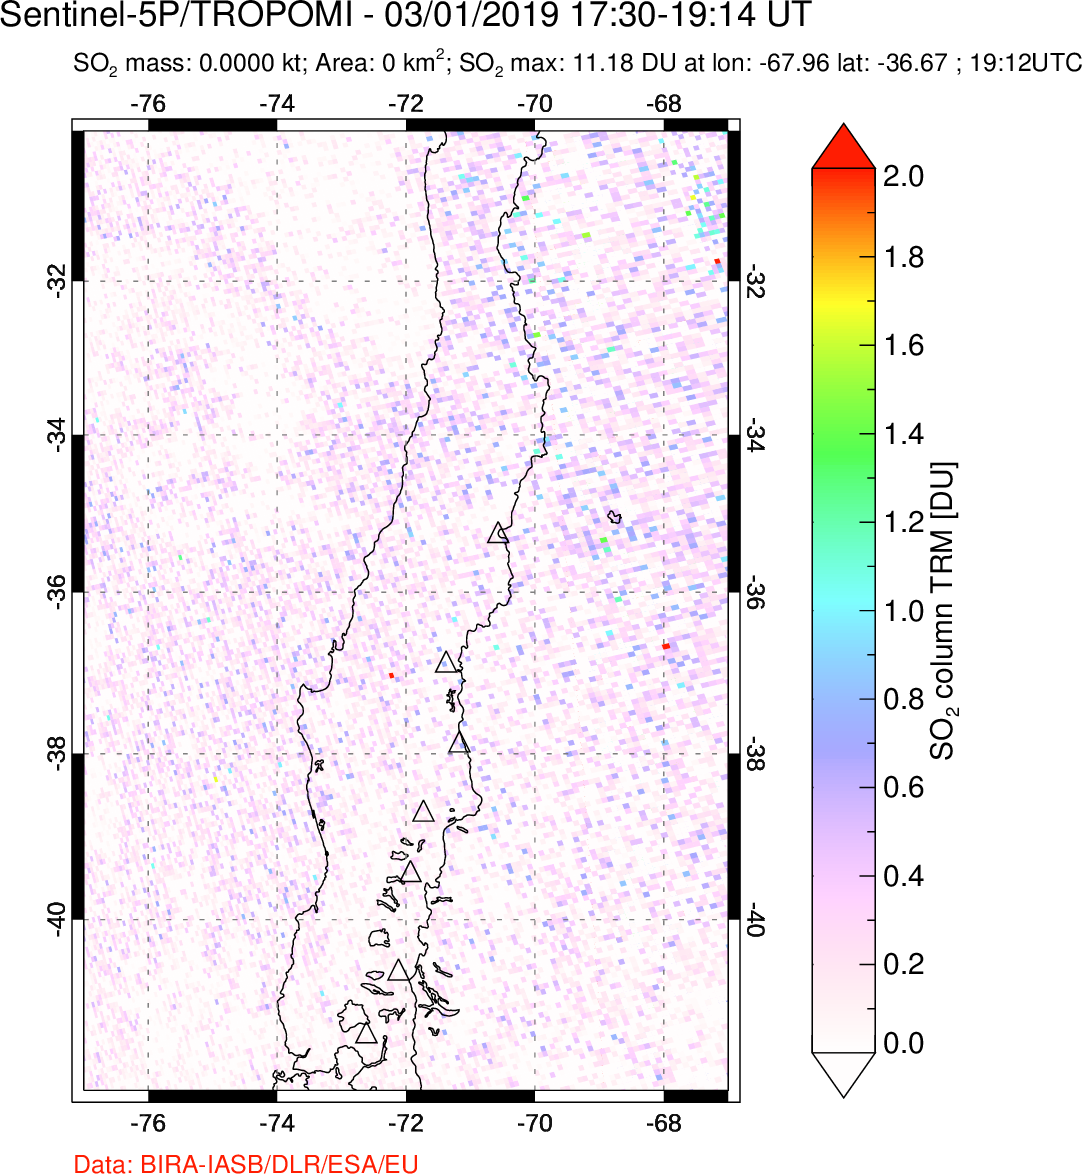 A sulfur dioxide image over Central Chile on Mar 01, 2019.